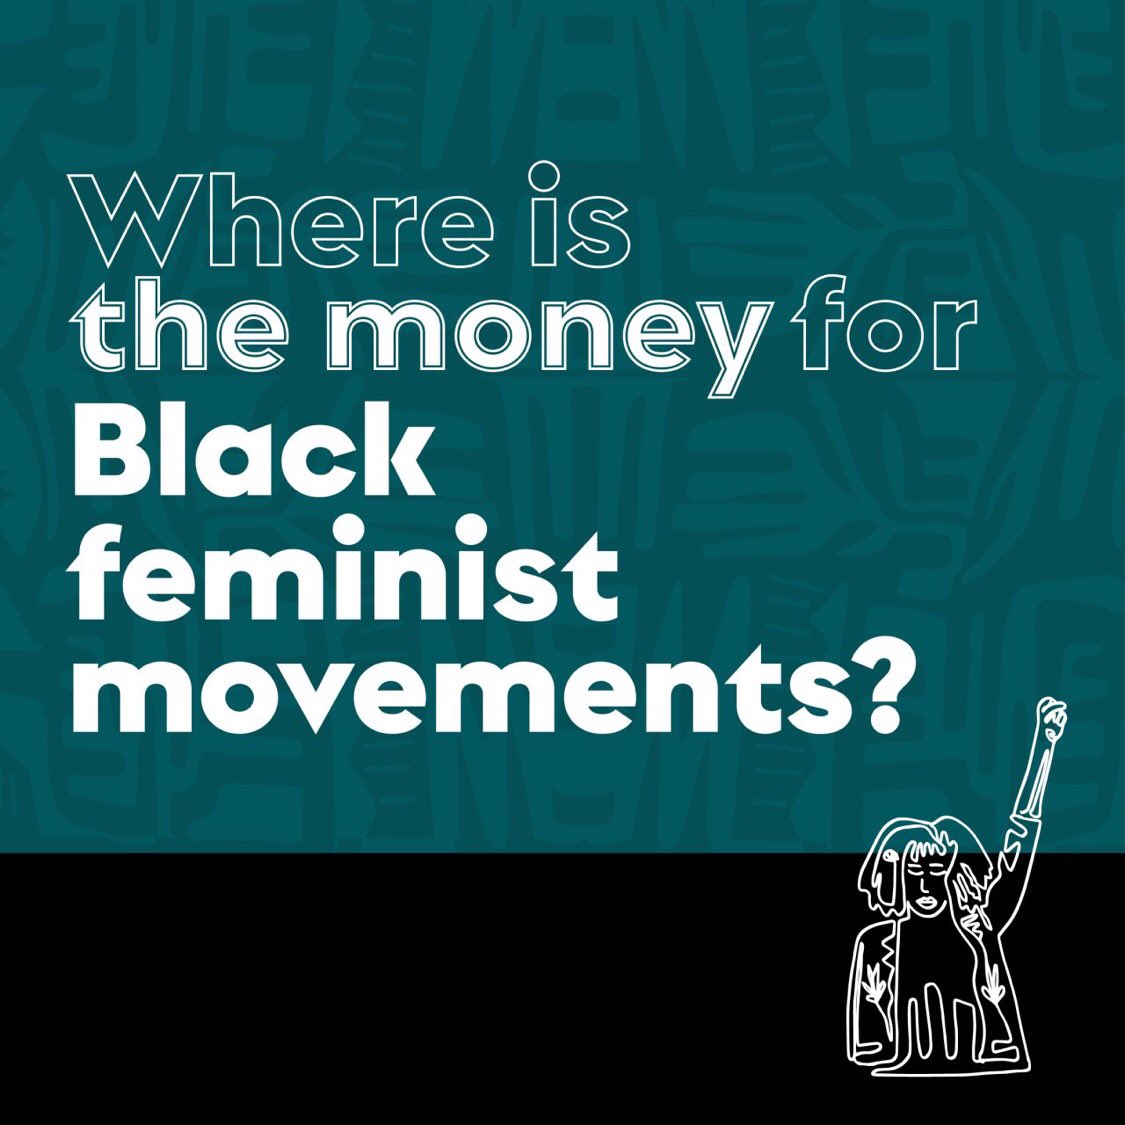 #blackfeministmovements

An open letter released from Black Feminist Fund and a range of leaders across philanthropy urges the sector to support Black feminists globally. 

For more information visit link 🔗lnkd.in/dHDuQ8dv 

#FundBlackFeminists 
#africanphilanthropy